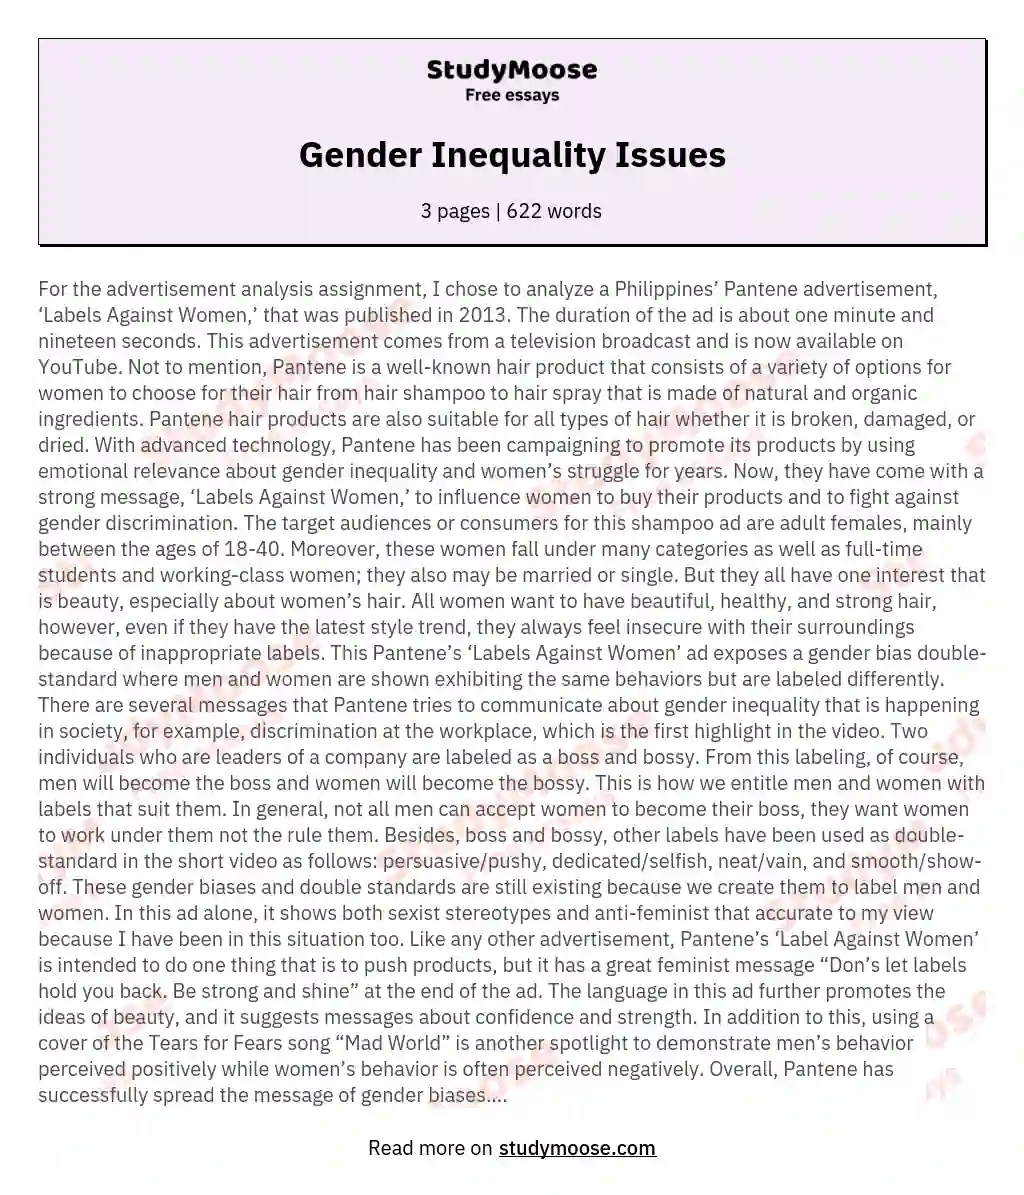 Gender Inequality Issues essay